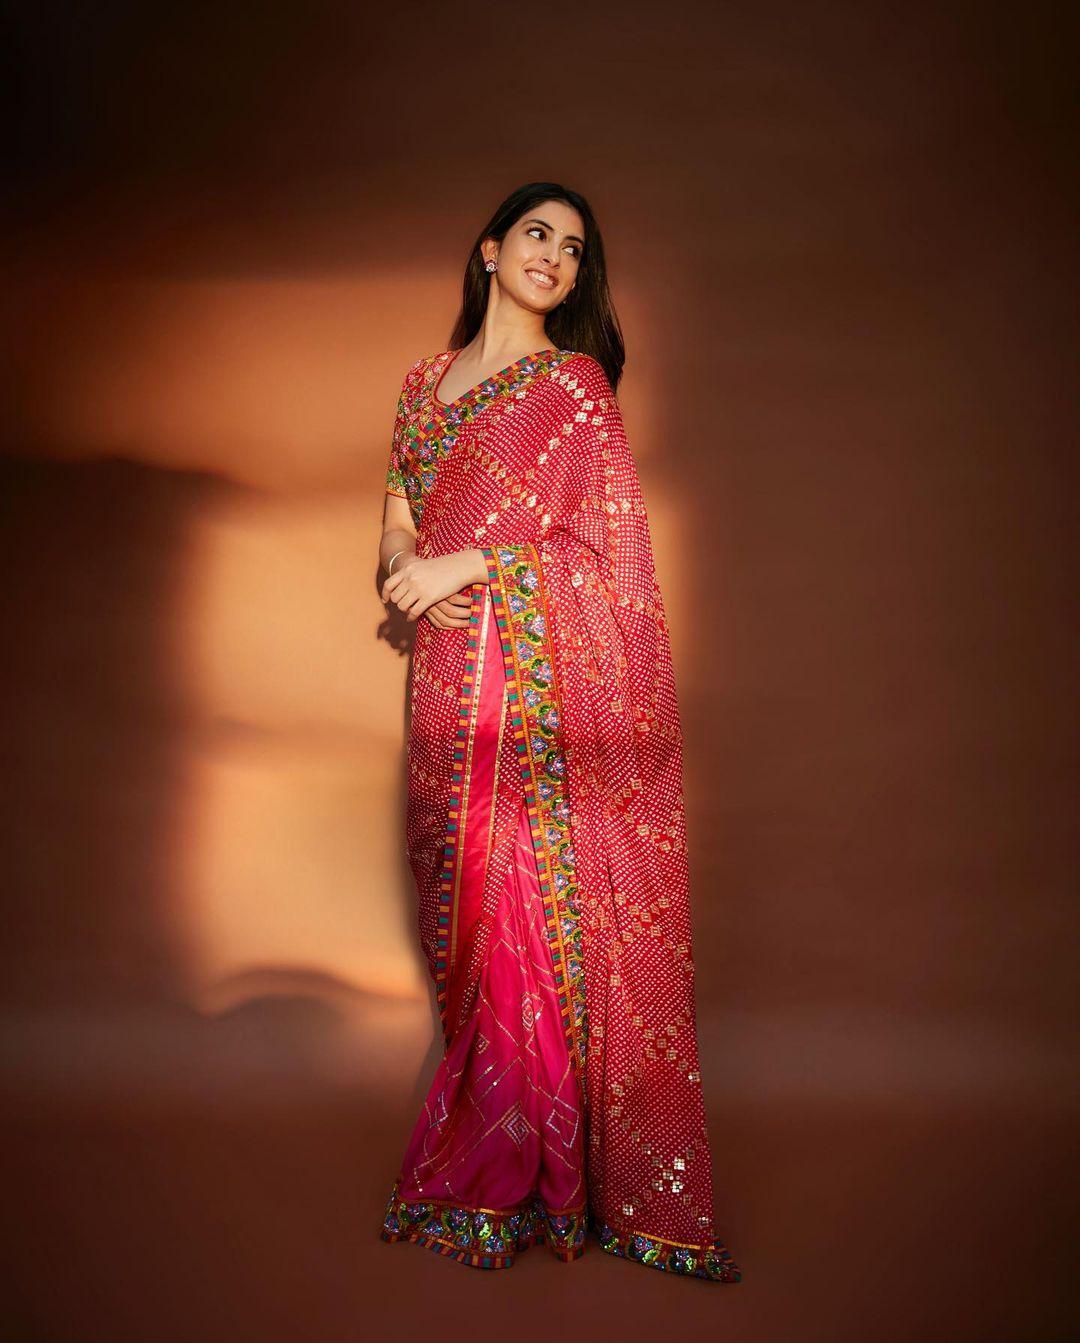 Do you have a wedding to attend and are worried about what to take inspiration from? Worry not, we've got you covered by bringing looks from the sweetest, Navya